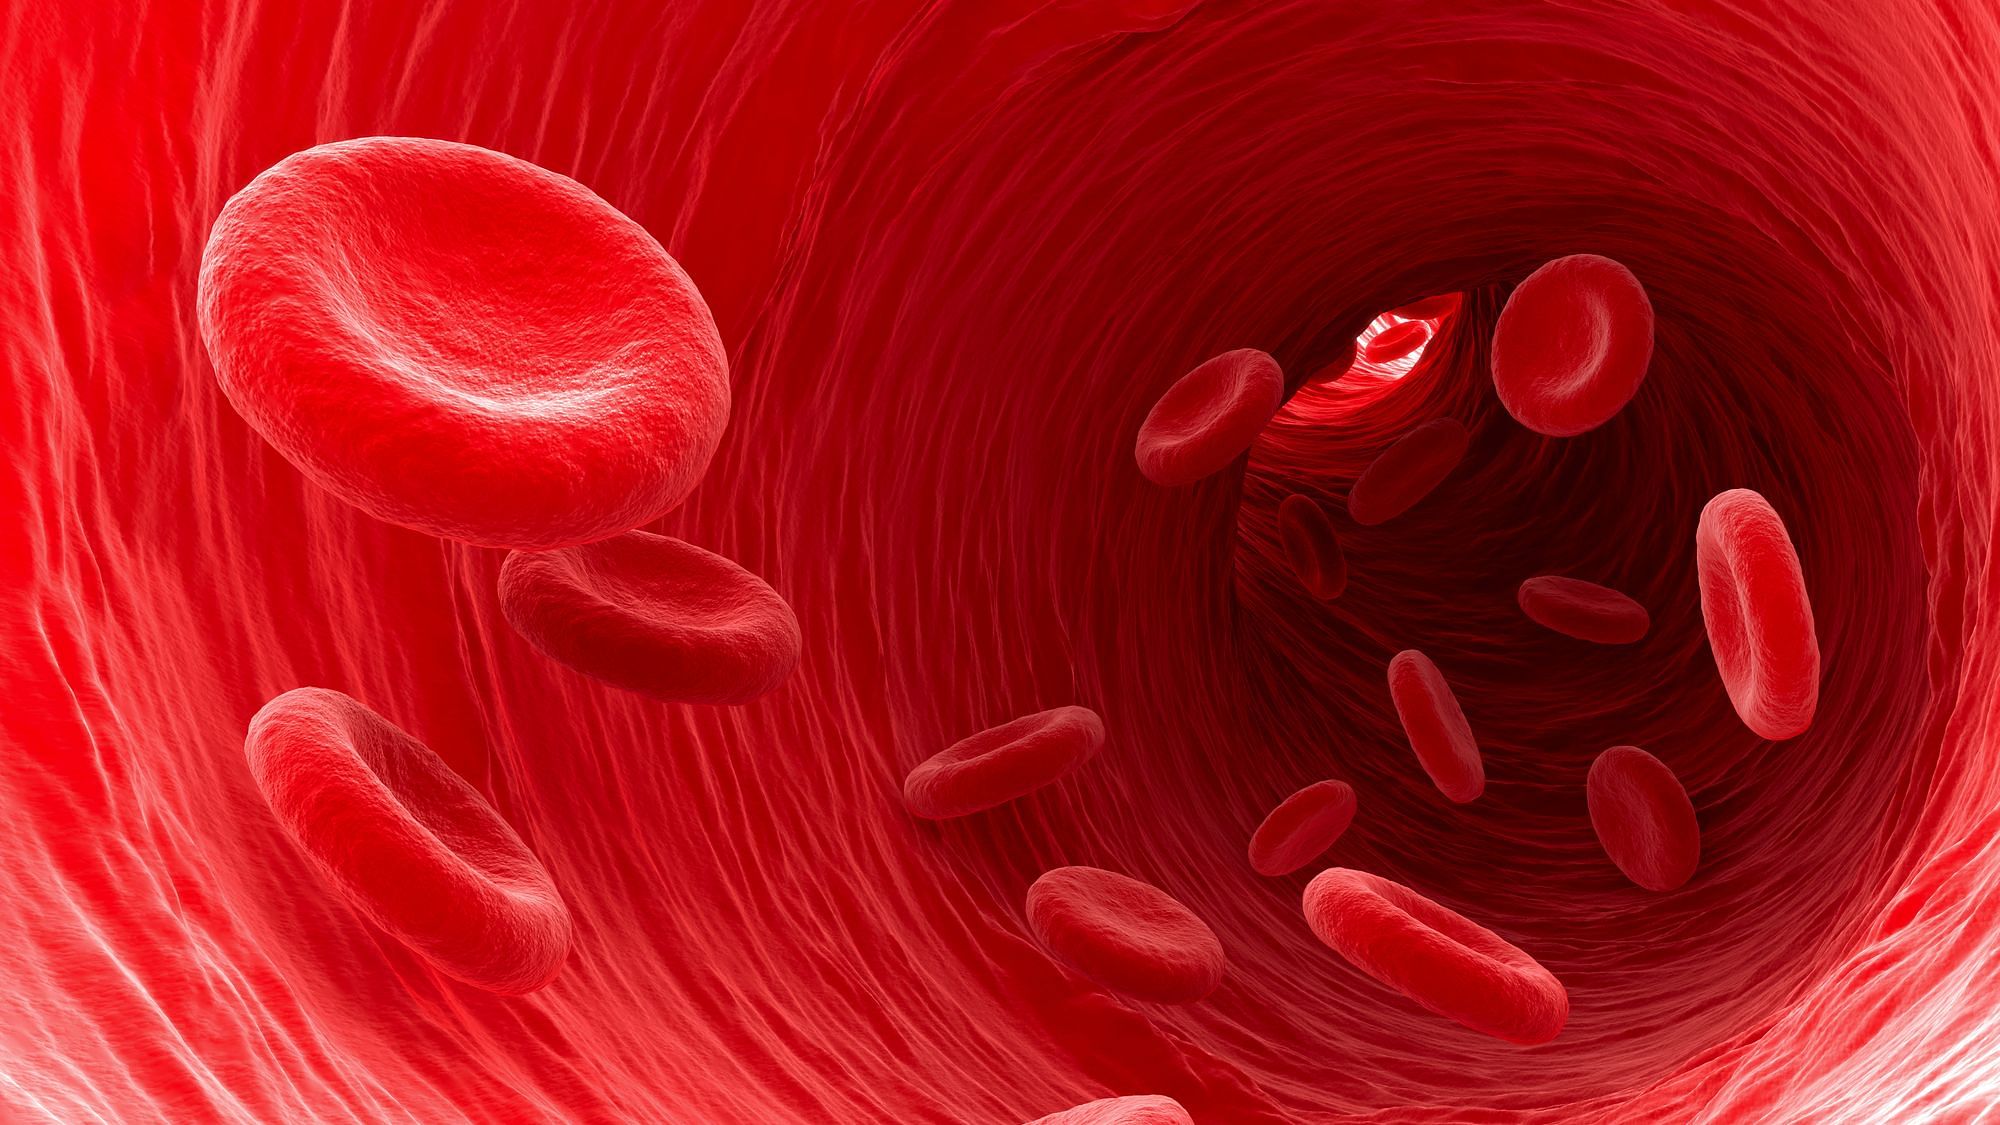 Human blood cells have an intrinsic clock that remains steady even after transplant, and could control human ageing as well as underlie blood cancers.